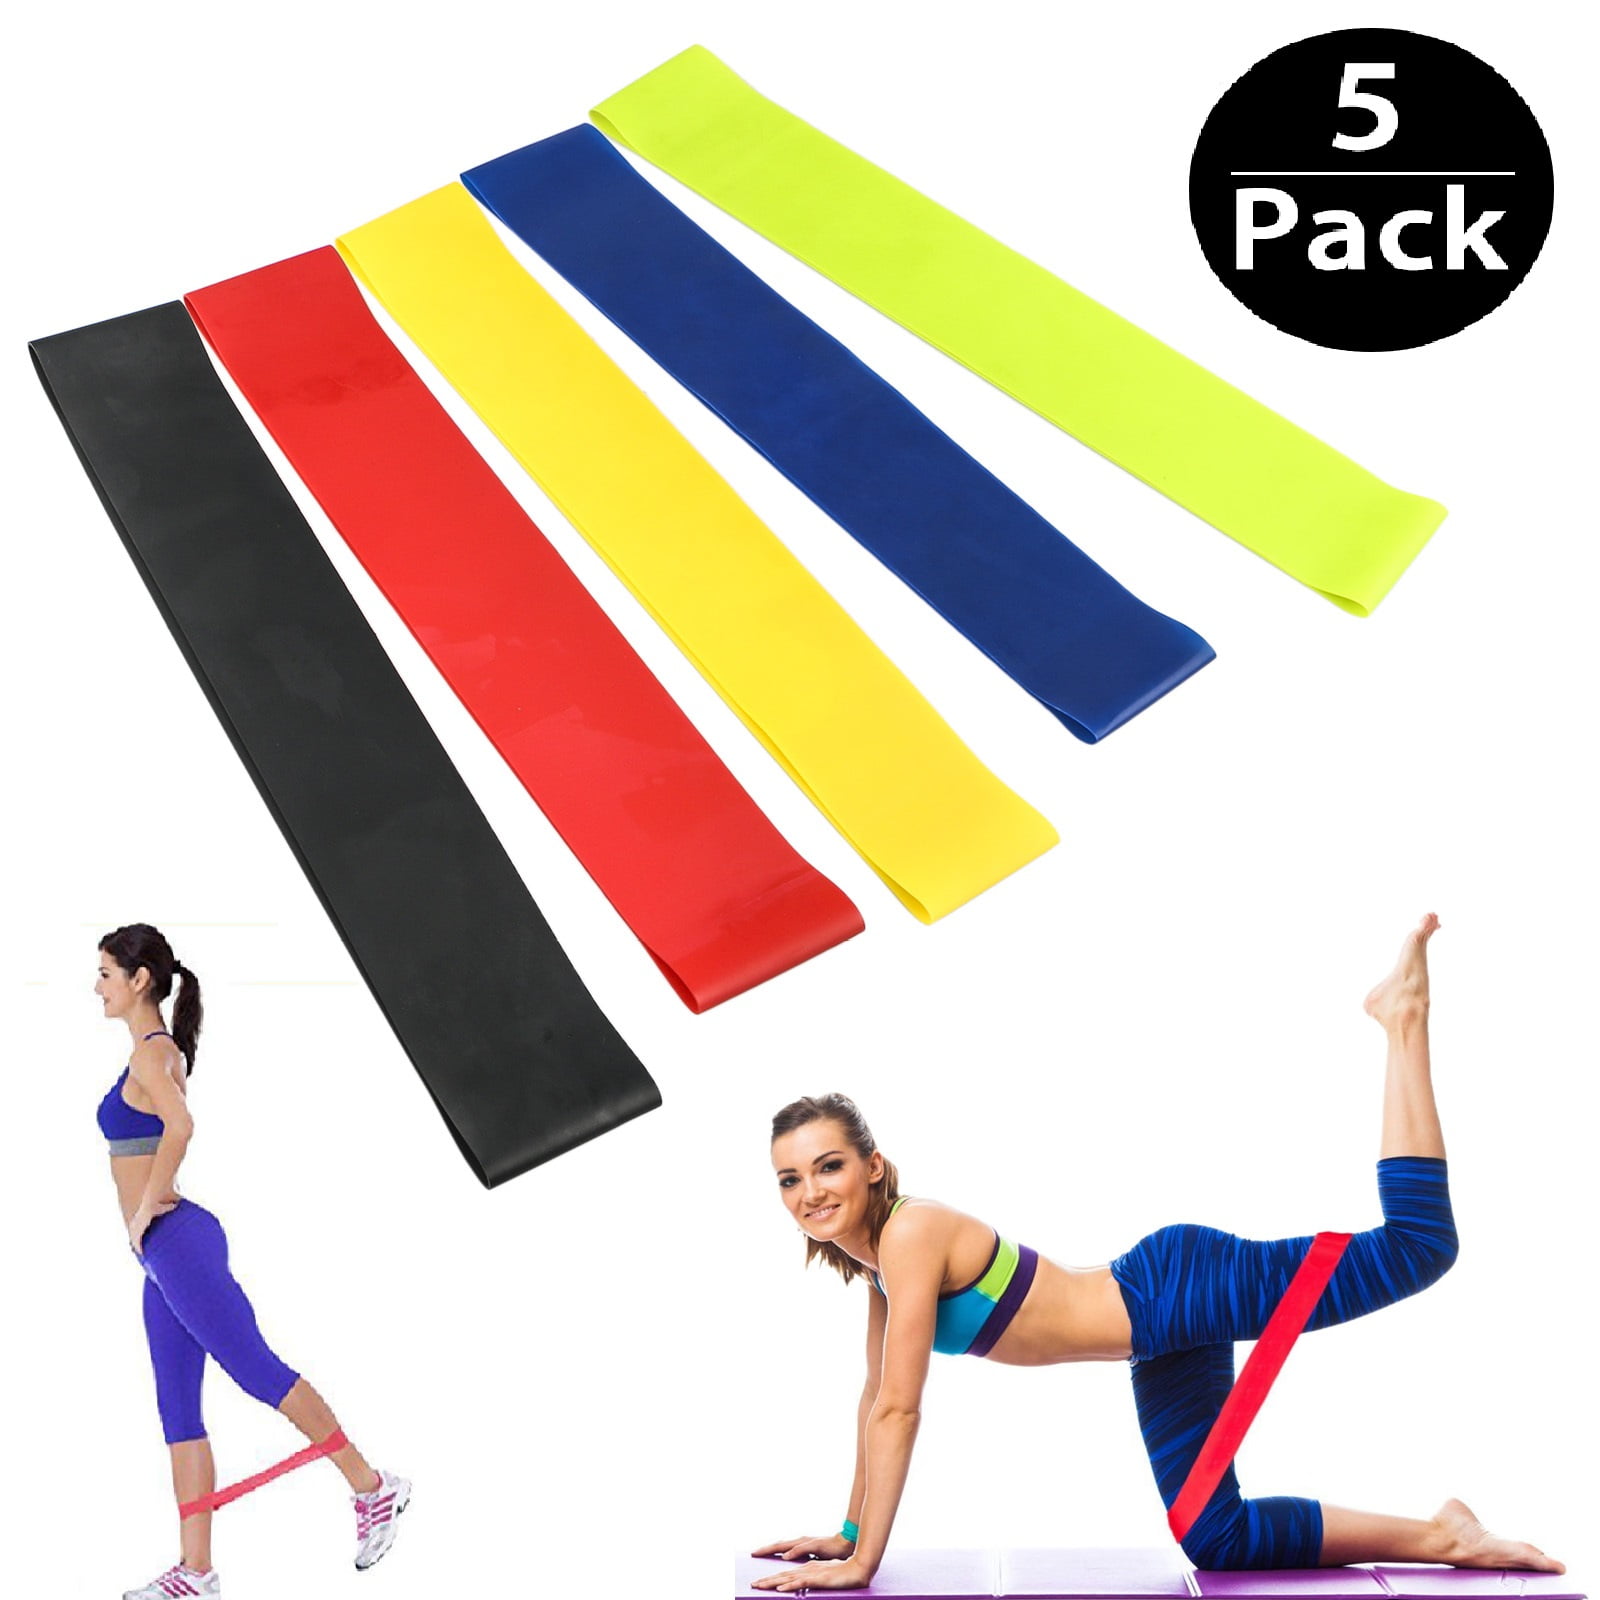 Improved Edition Loop Kit for Legs Butt Glutes Yoga Fitness Physical Therapy Home Equipment Training Workout Bands Stretch Bands Resistance Bands Set Exercise Bands 